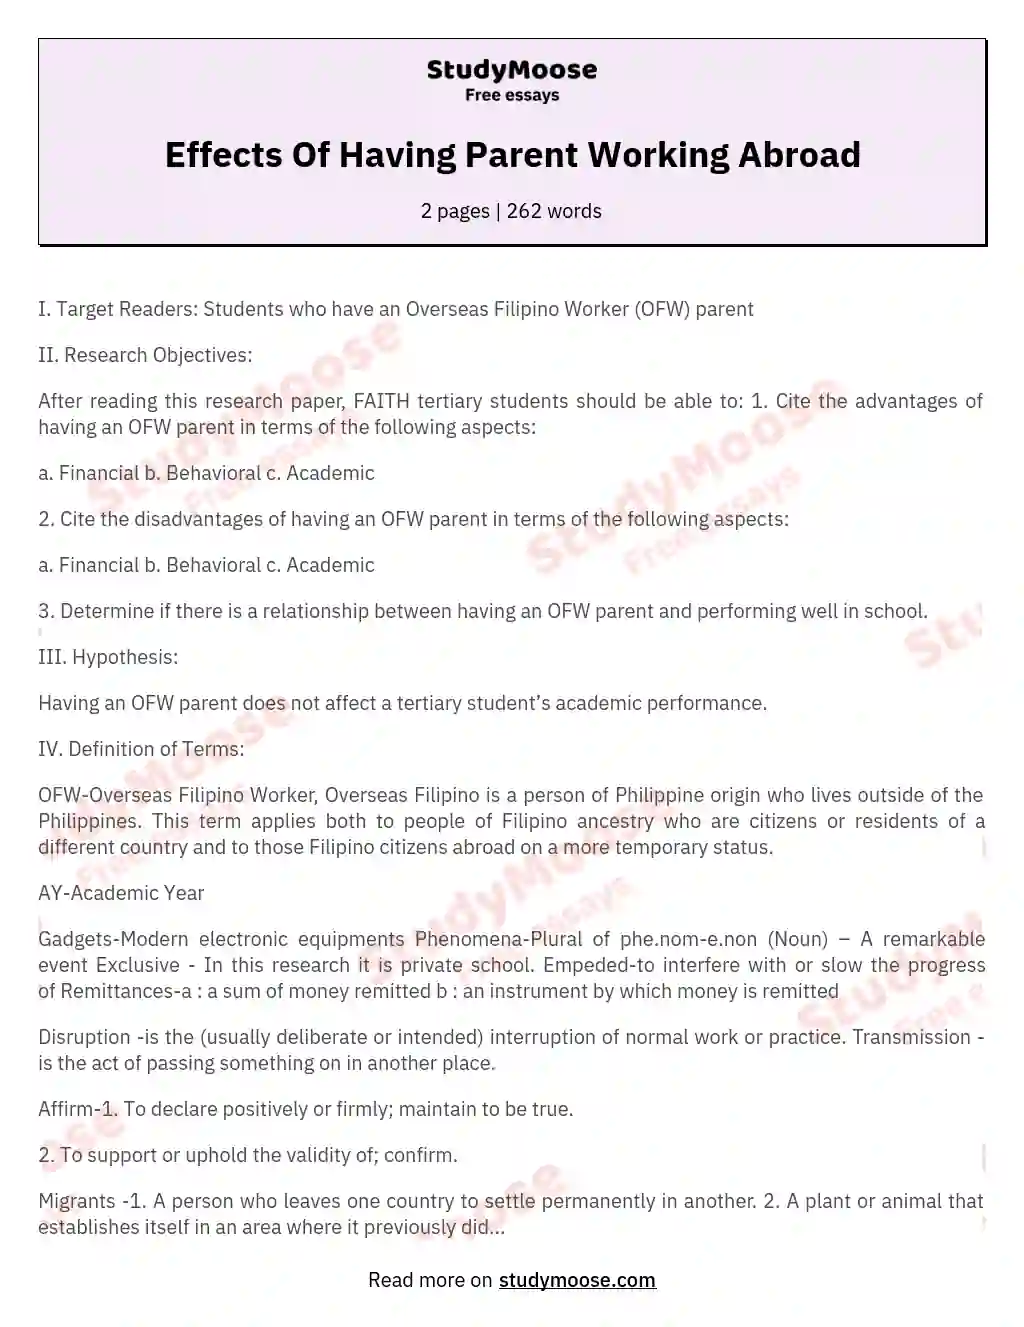 Effects Of Having Parent Working Abroad essay